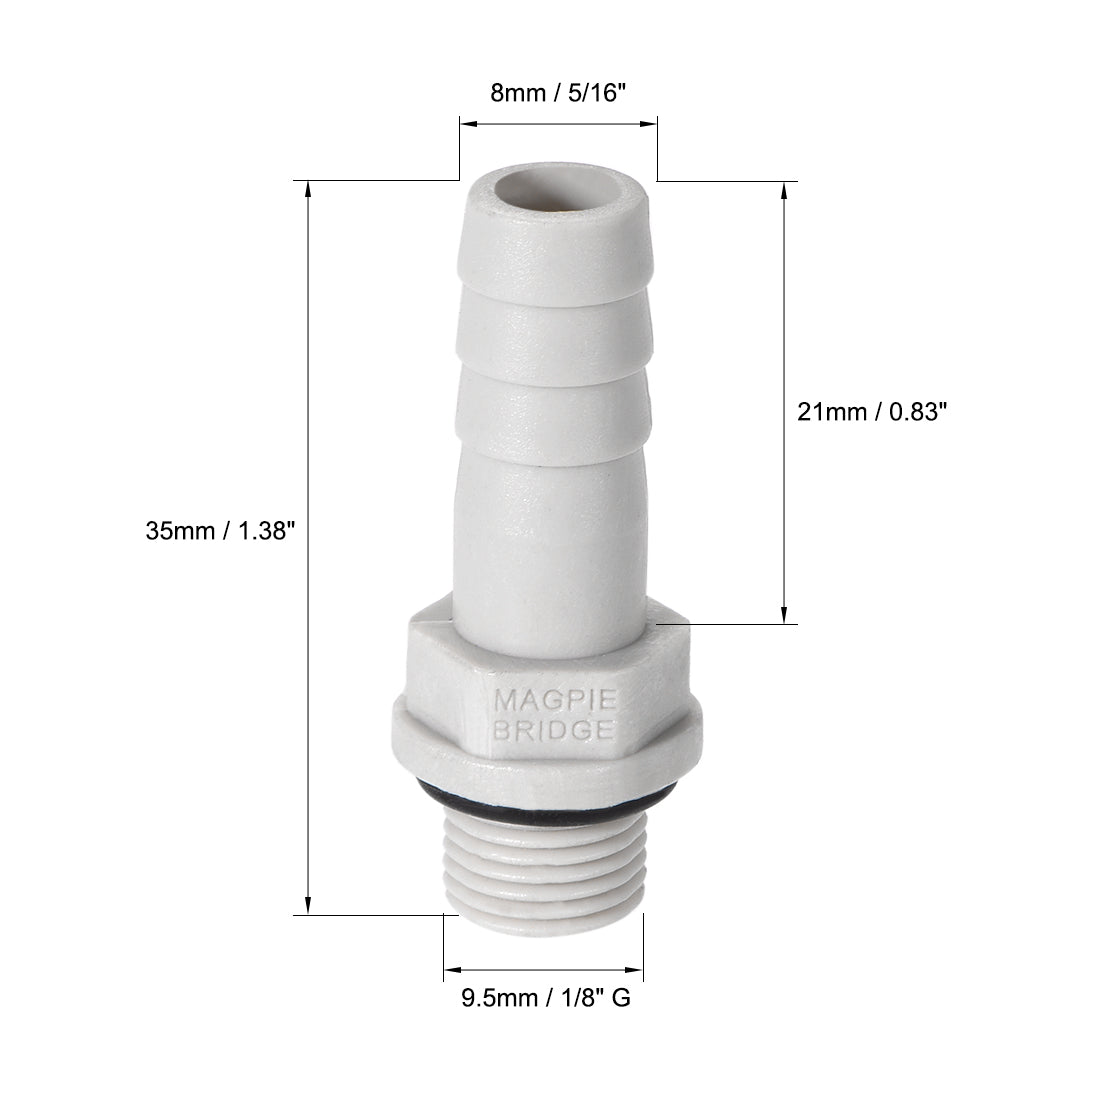 Uxcell Uxcell PVC Barb Hose Fitting Connector Adapter 10mm or 25/64" Barbed x 1/8NPT Male Pipe 2pcs